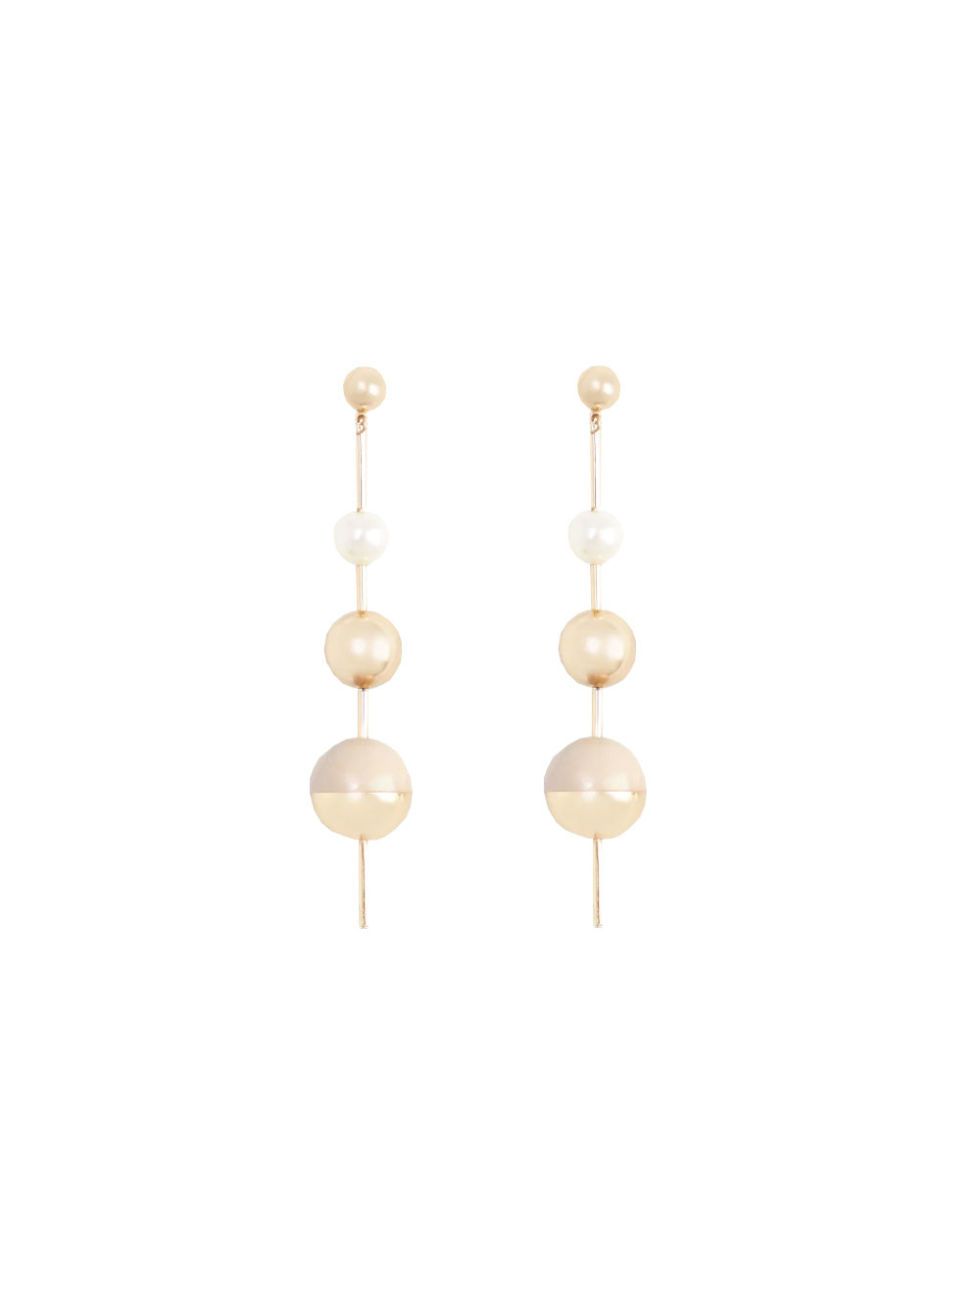 Earrings, Natural material, Body jewelry, Beige, Ivory, Metal, Craft, Pearl, Silver, Circle, 